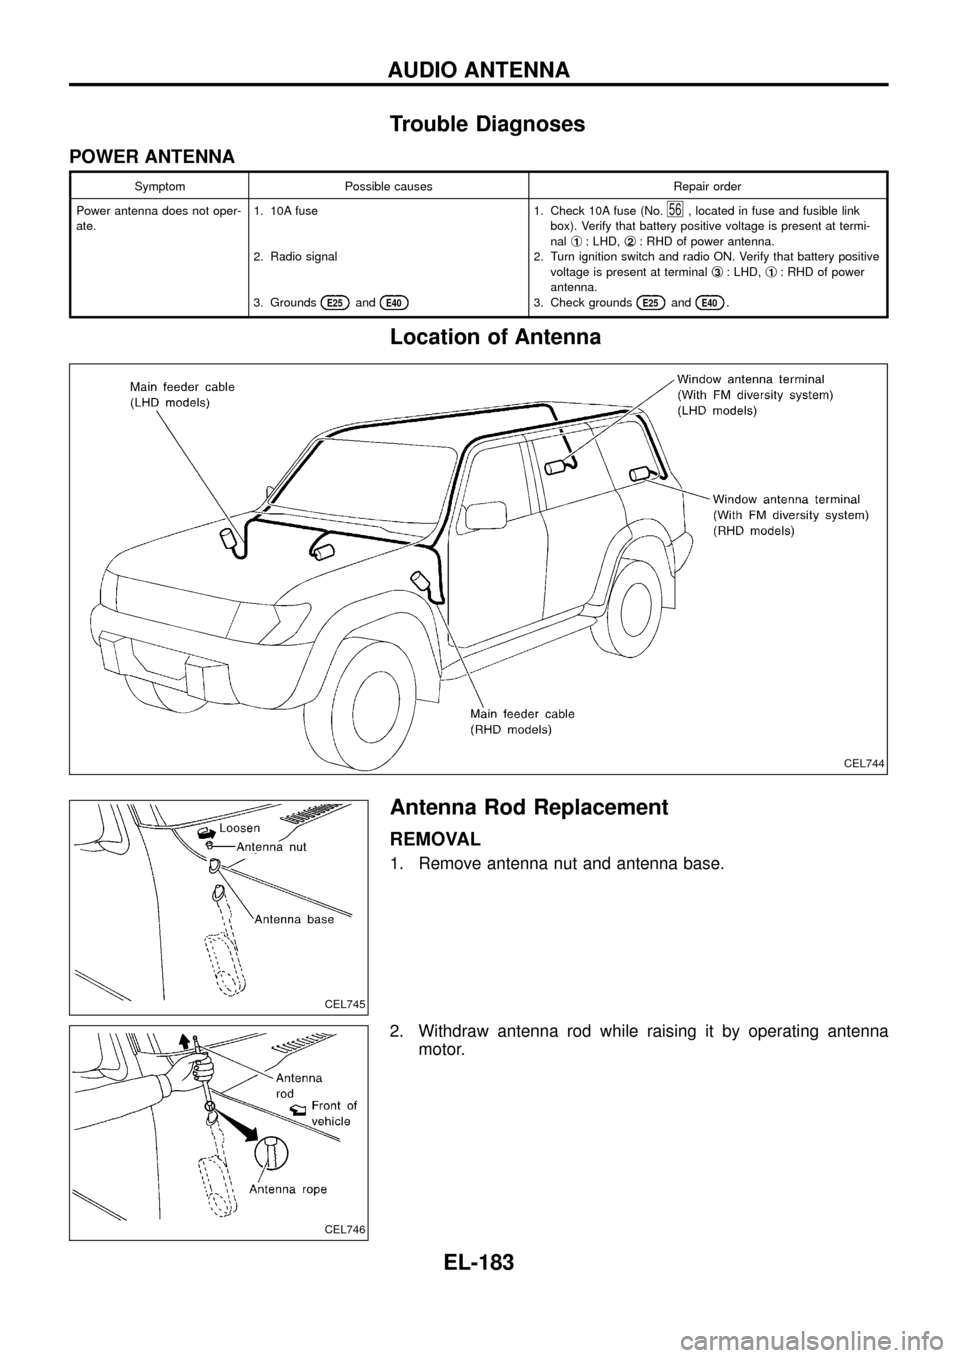 NISSAN PATROL 1998 Y61 / 5.G Electrical System Owners Manual Trouble Diagnoses
POWER ANTENNA
Symptom Possible causes Repair order
Power antenna does not oper-
ate.1. 10A fuse
2. Radio signal
3. Grounds
E25andE40
1. Check 10A fuse (No.56, located in fuse and fus